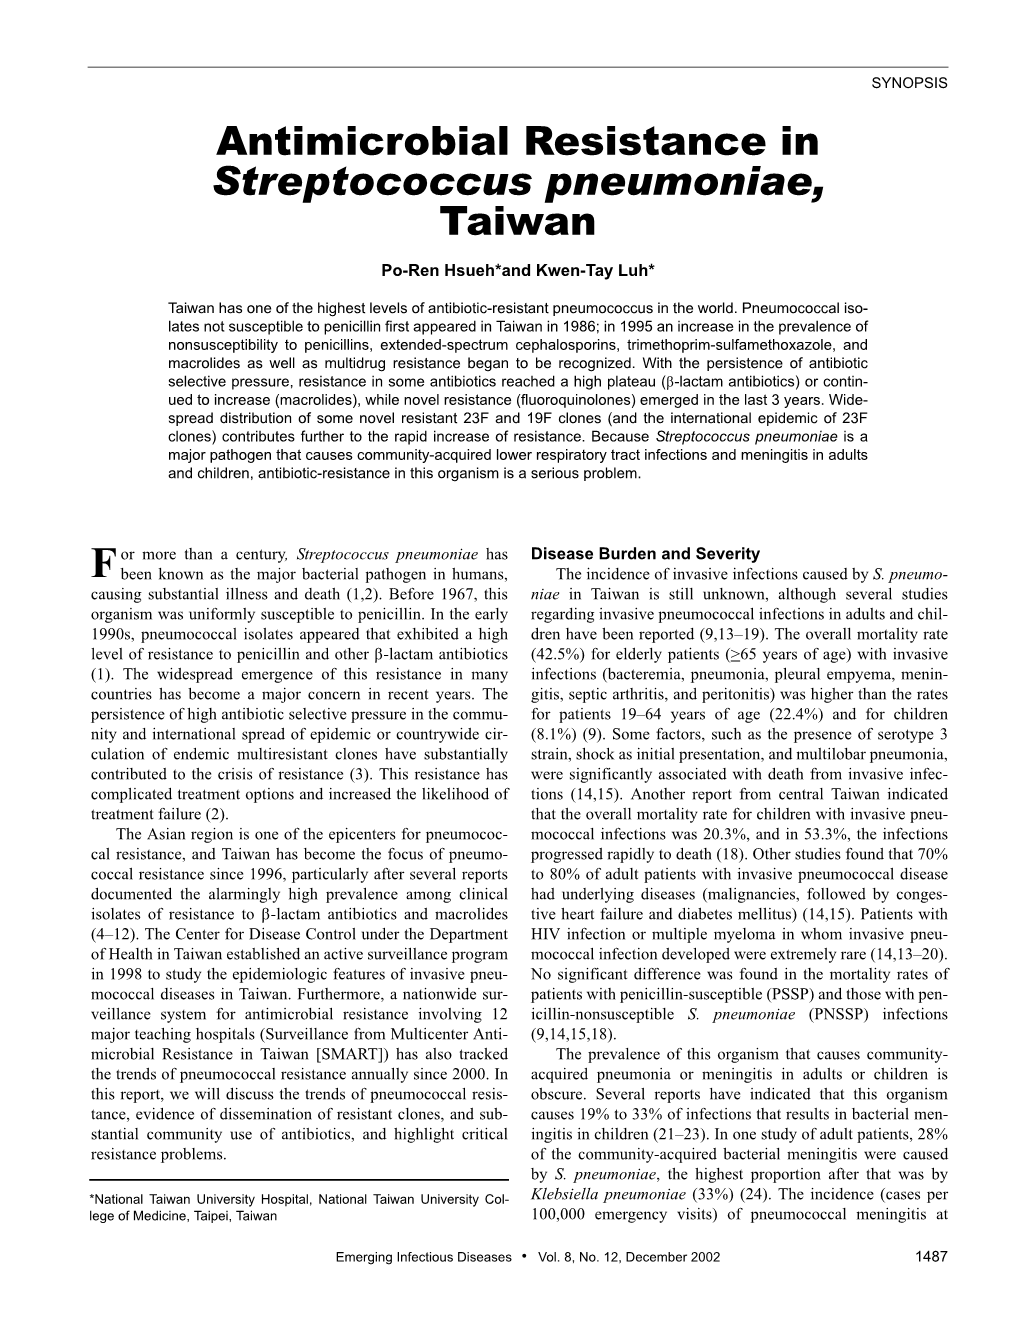 Antimicrobial Resistance in Streptococcus Pneumoniae, Taiwan Po-Ren Hsueh*And Kwen-Tay Luh*